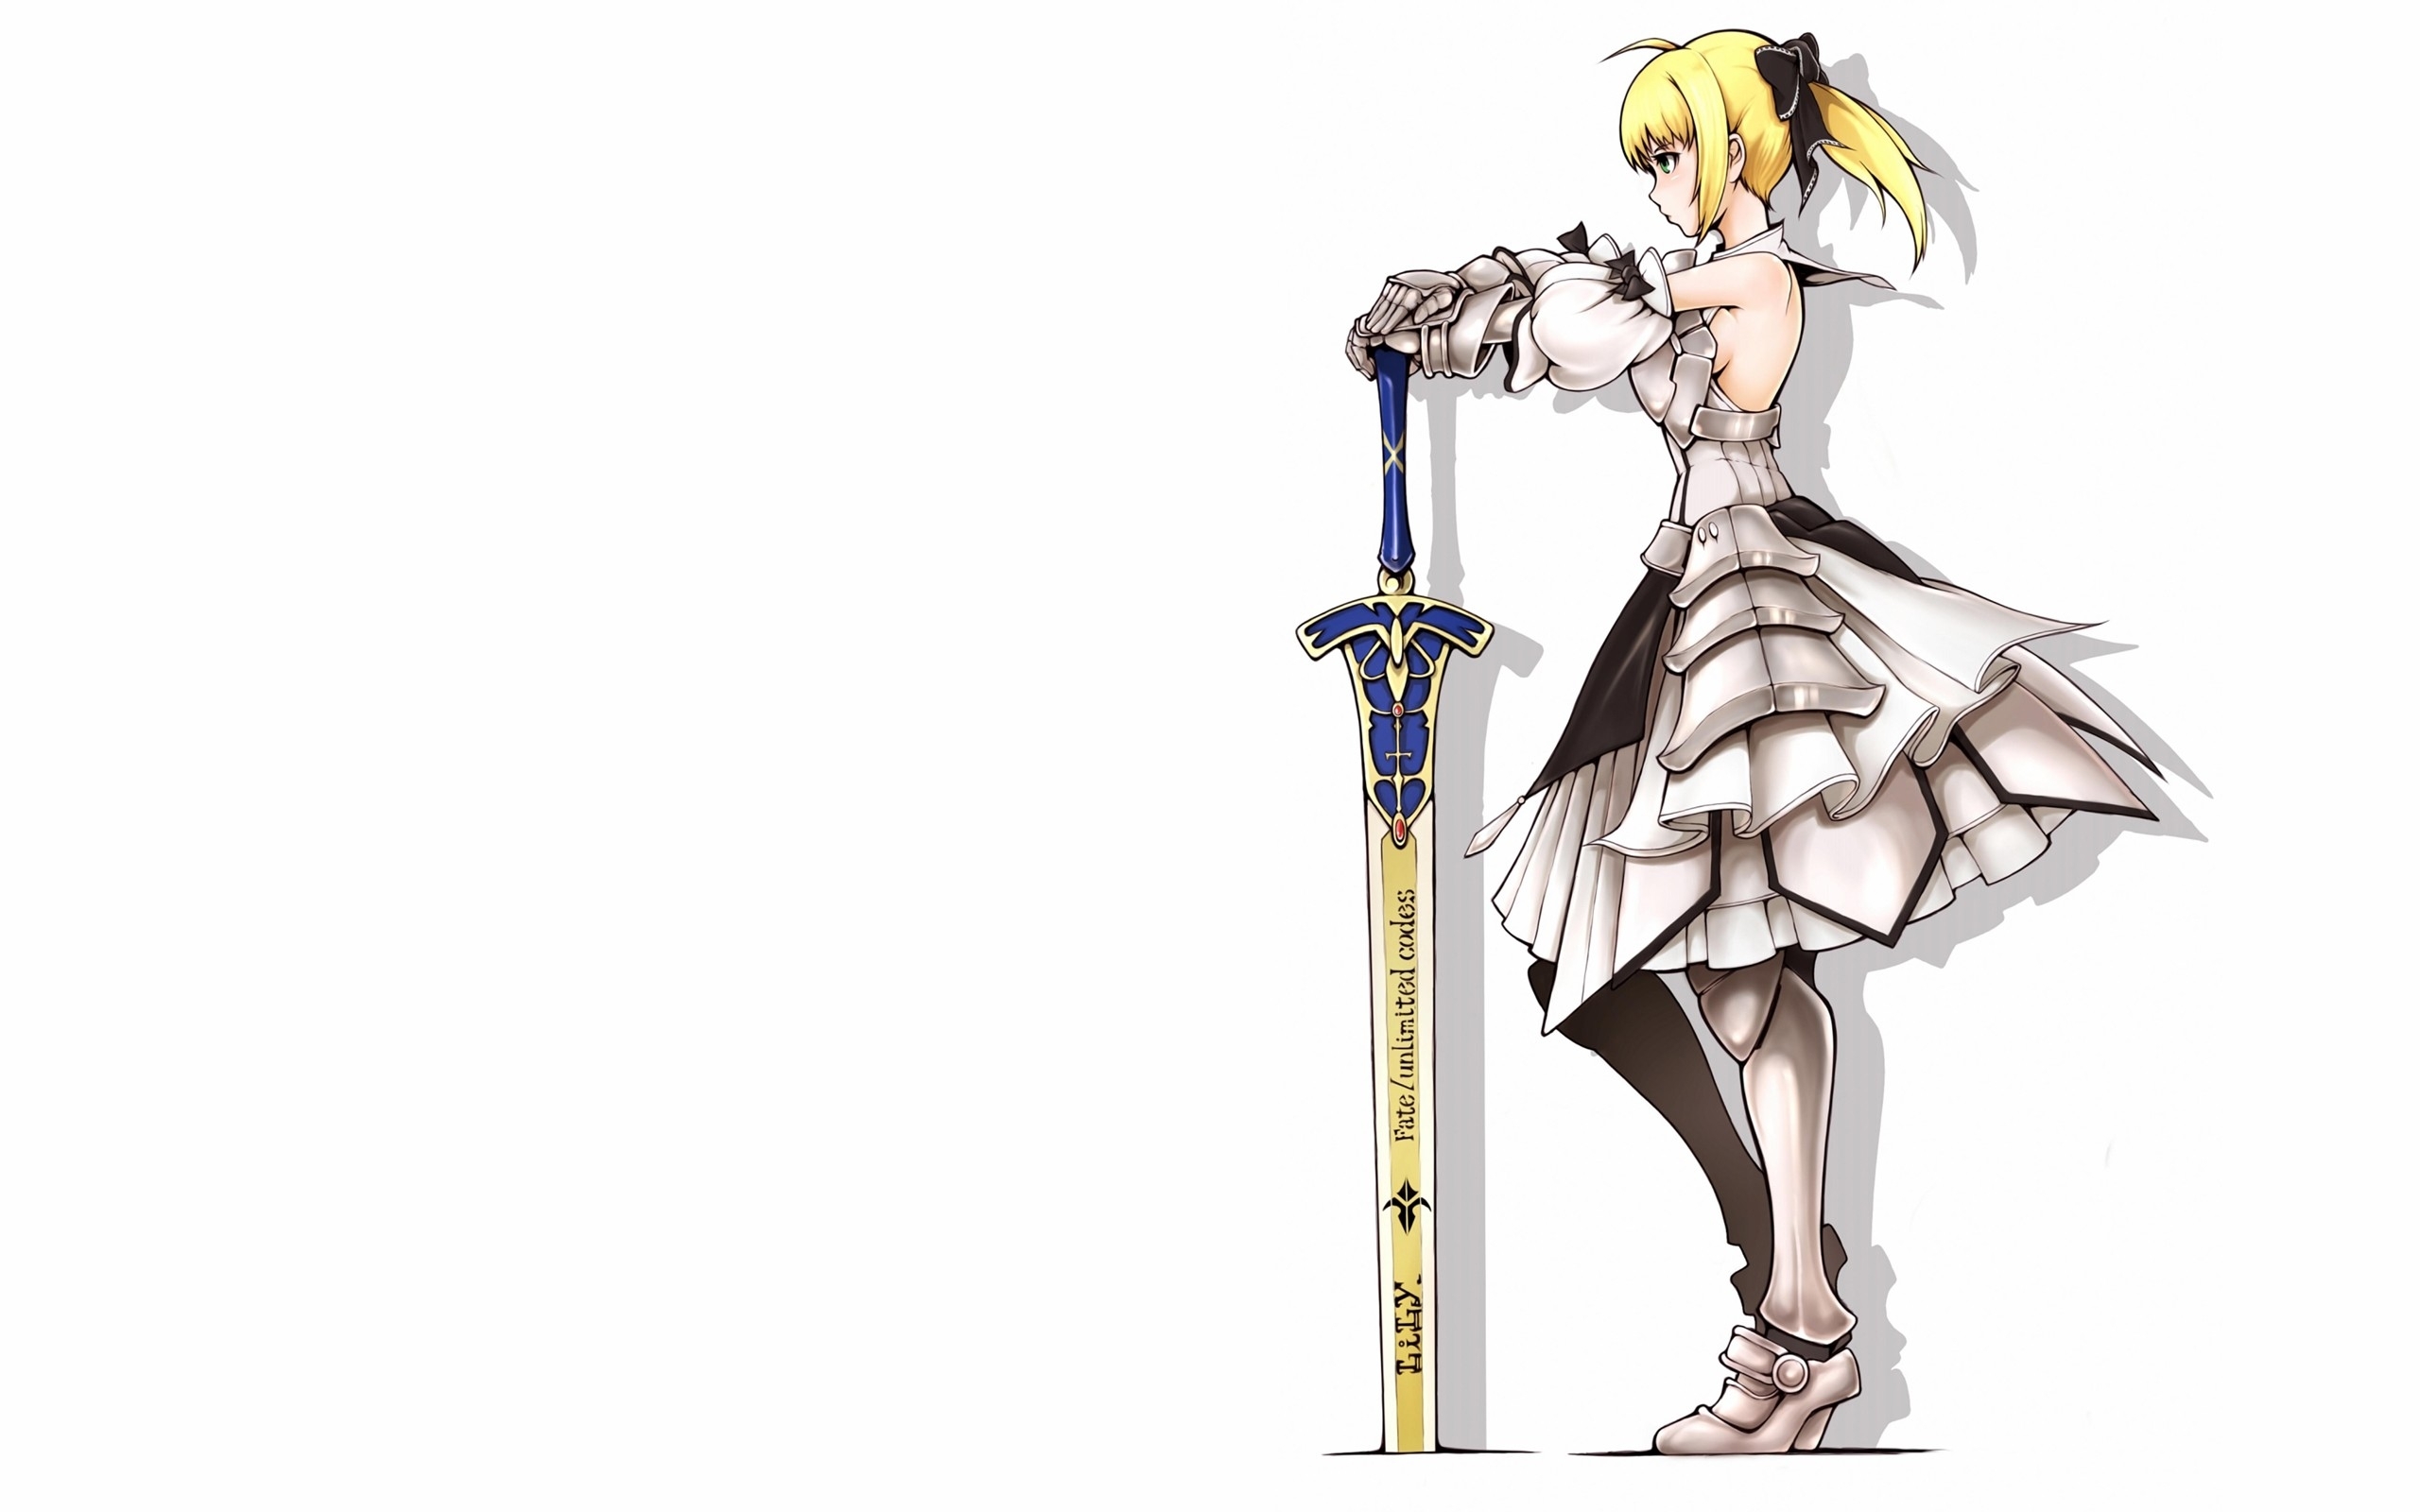 Blondes Fate Unlimited Codes Thighs Ponytails Saber - Saber Lily Fate - HD Wallpaper 